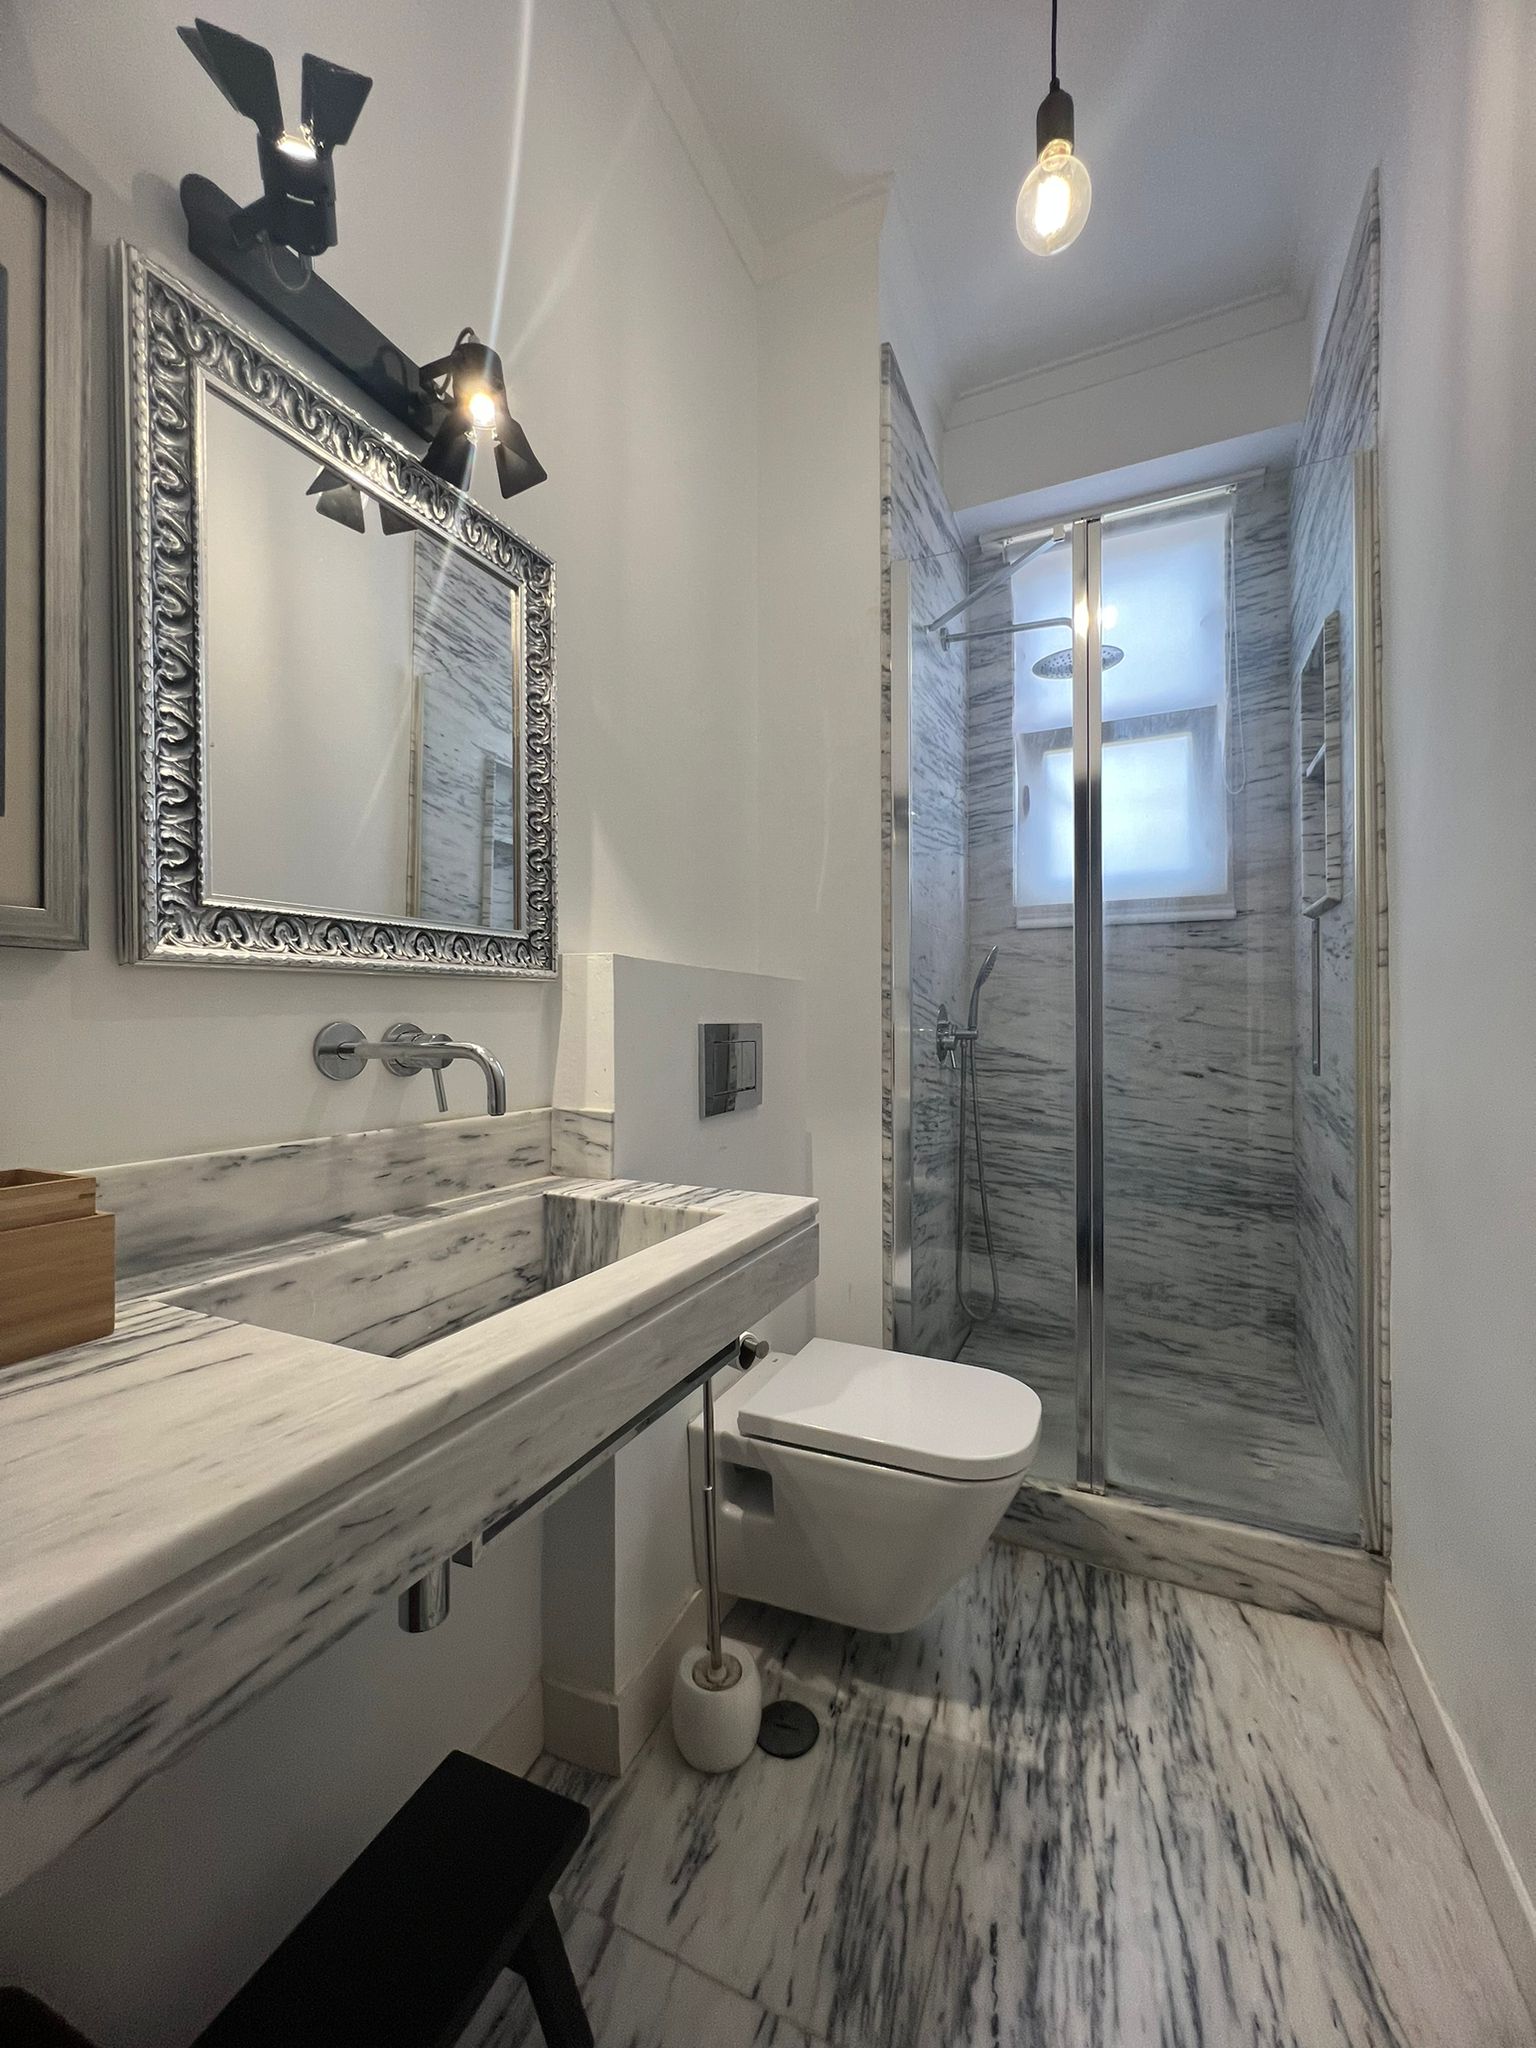 Apartment for rent in Lisbon - Bathroom